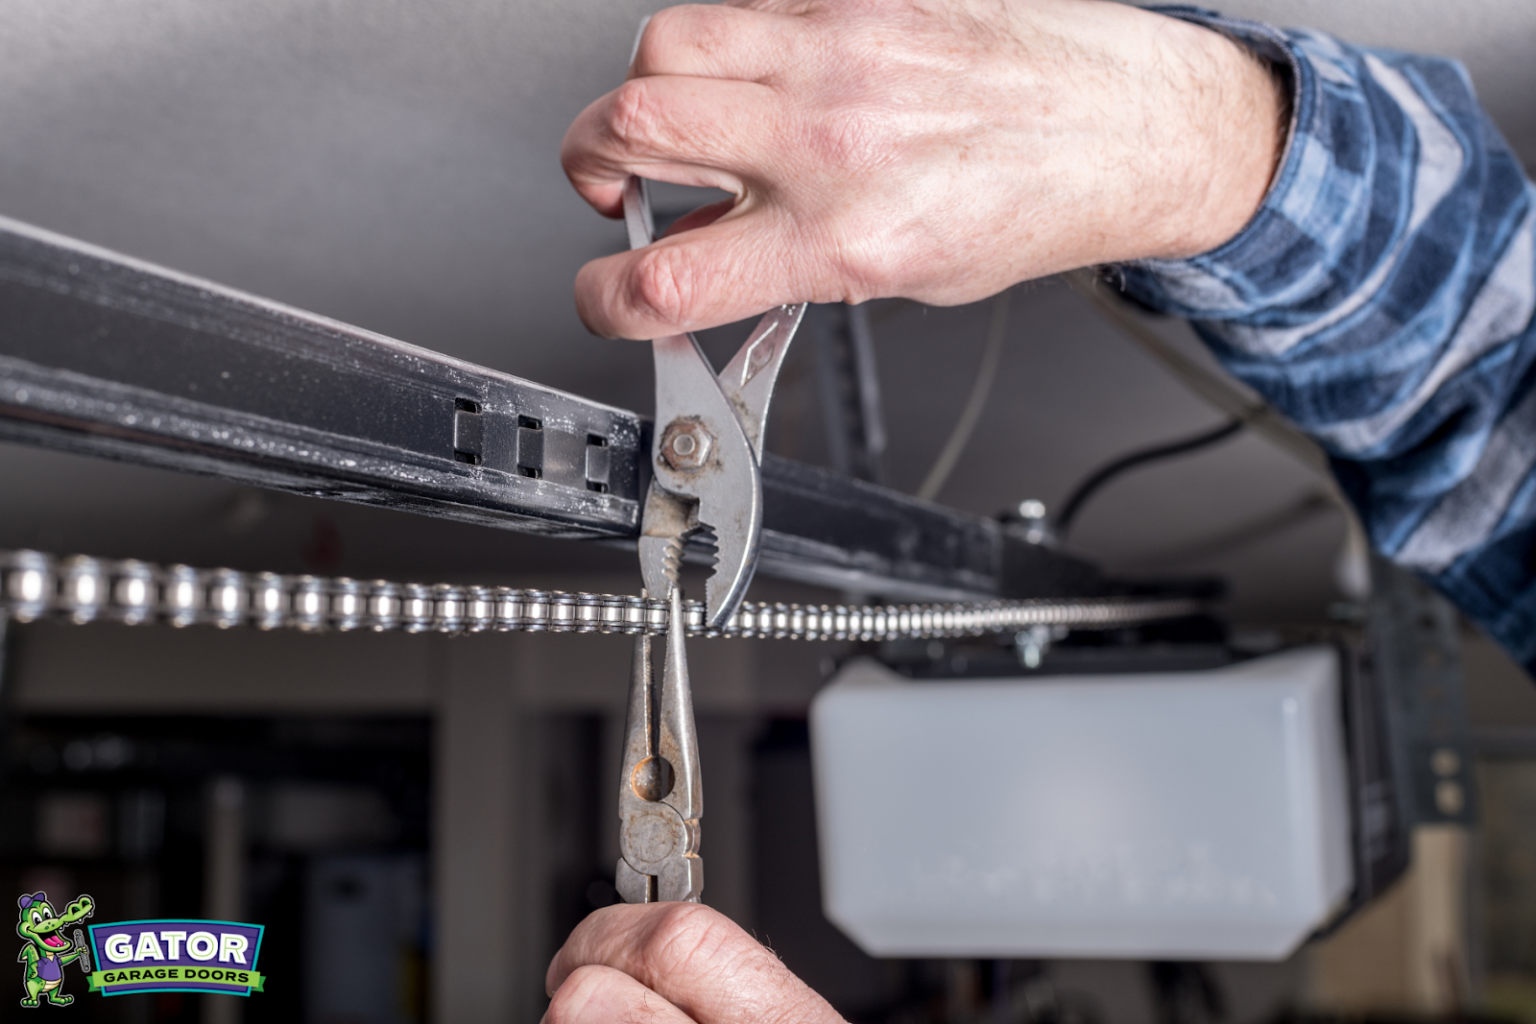 Garage Door Cable Replacement: A DIY Safety Guide